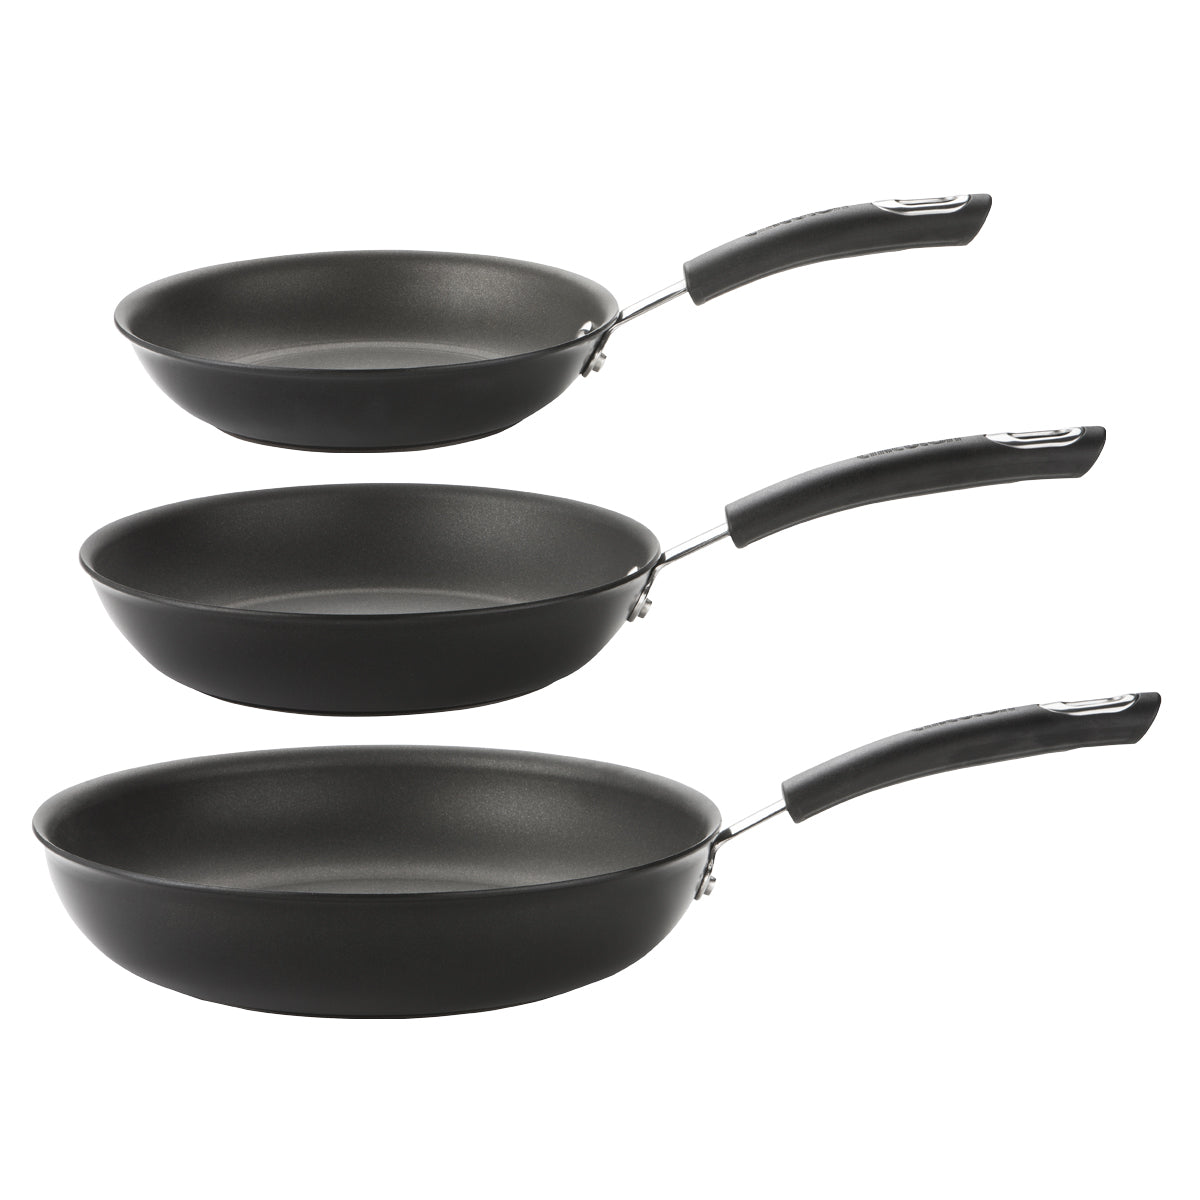 Image of Total Non-Stick Induction Frying Pan Set - 3 Pieces